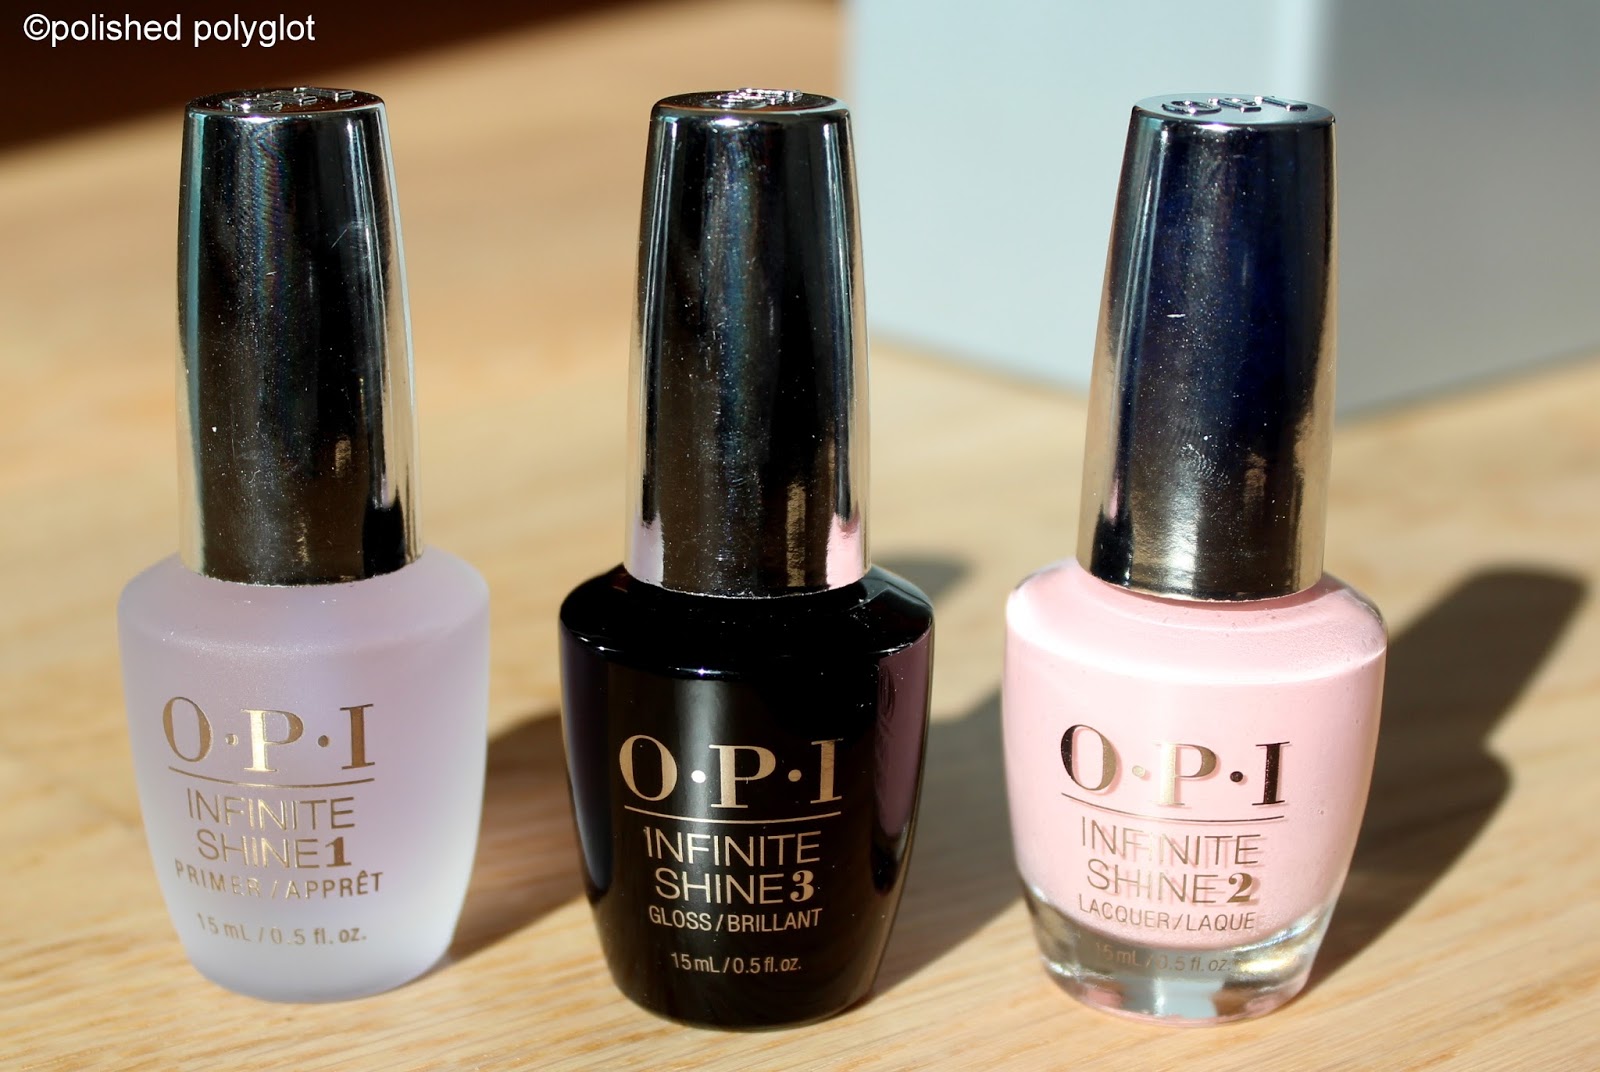 1. OPI Nail Lacquer, Tri-Cure Technology, 3-in-1 Nail Polish - wide 9